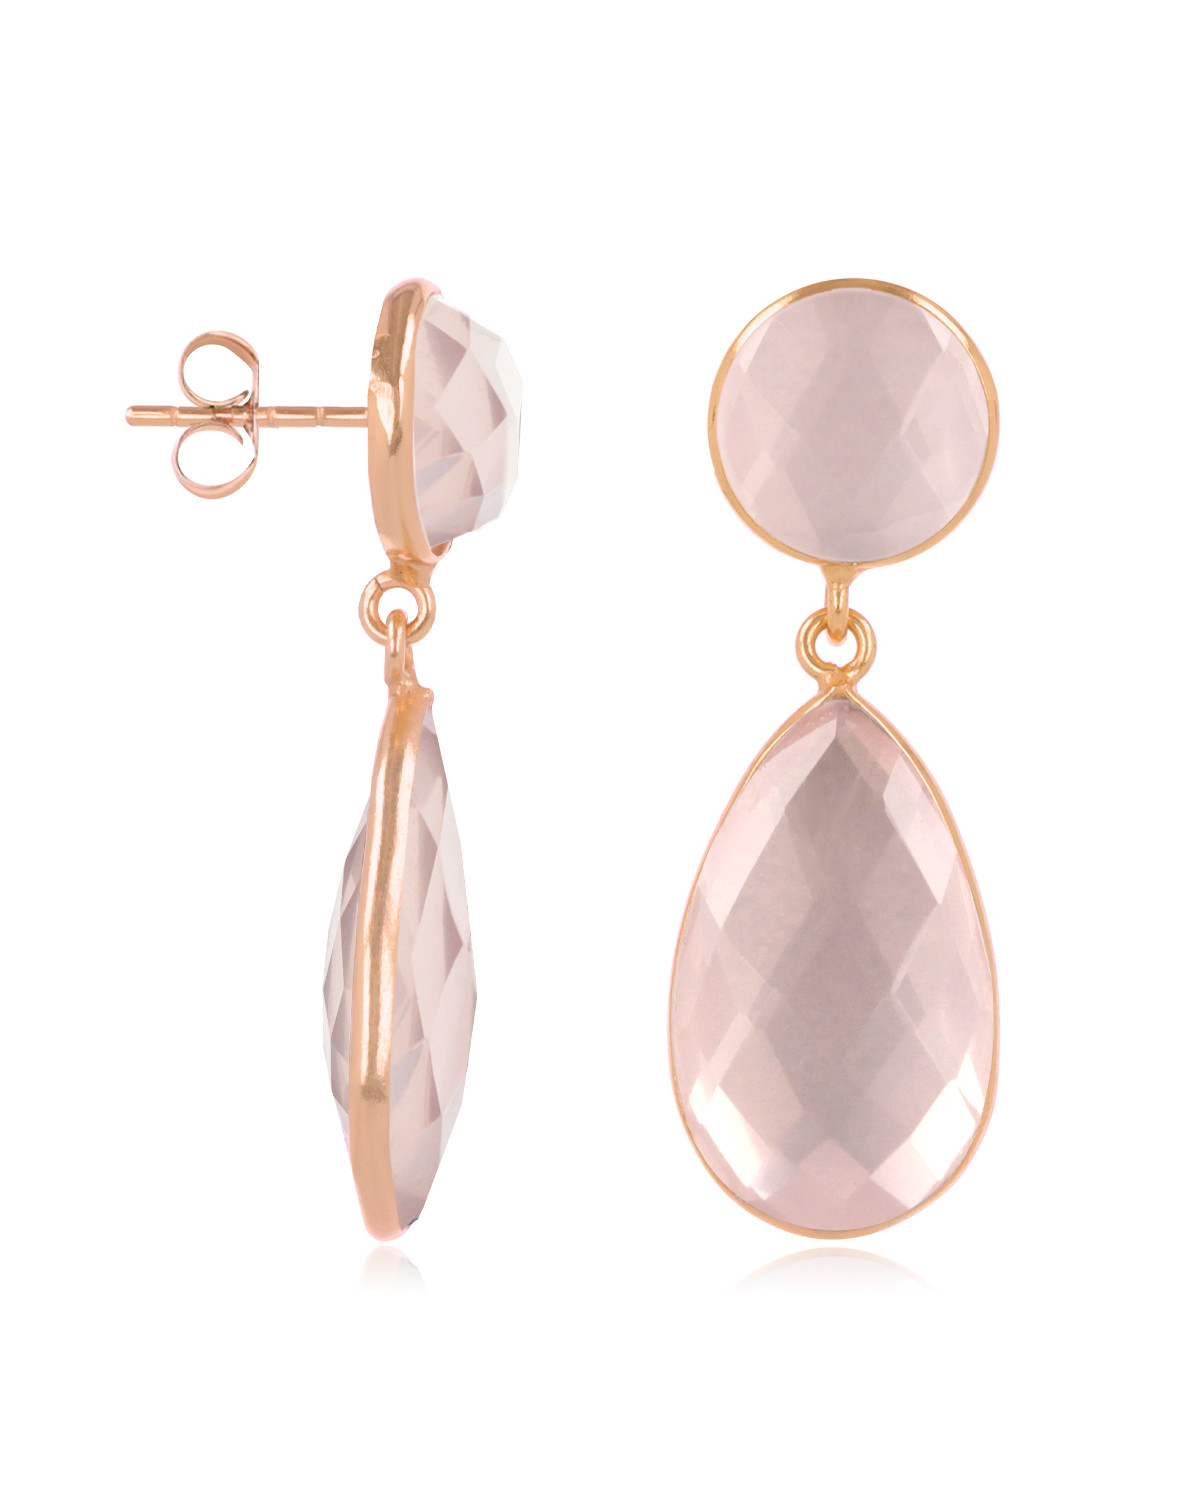 Natural Pink Quartz Earrings, setting fine rose gold plated on 925 sterling silver